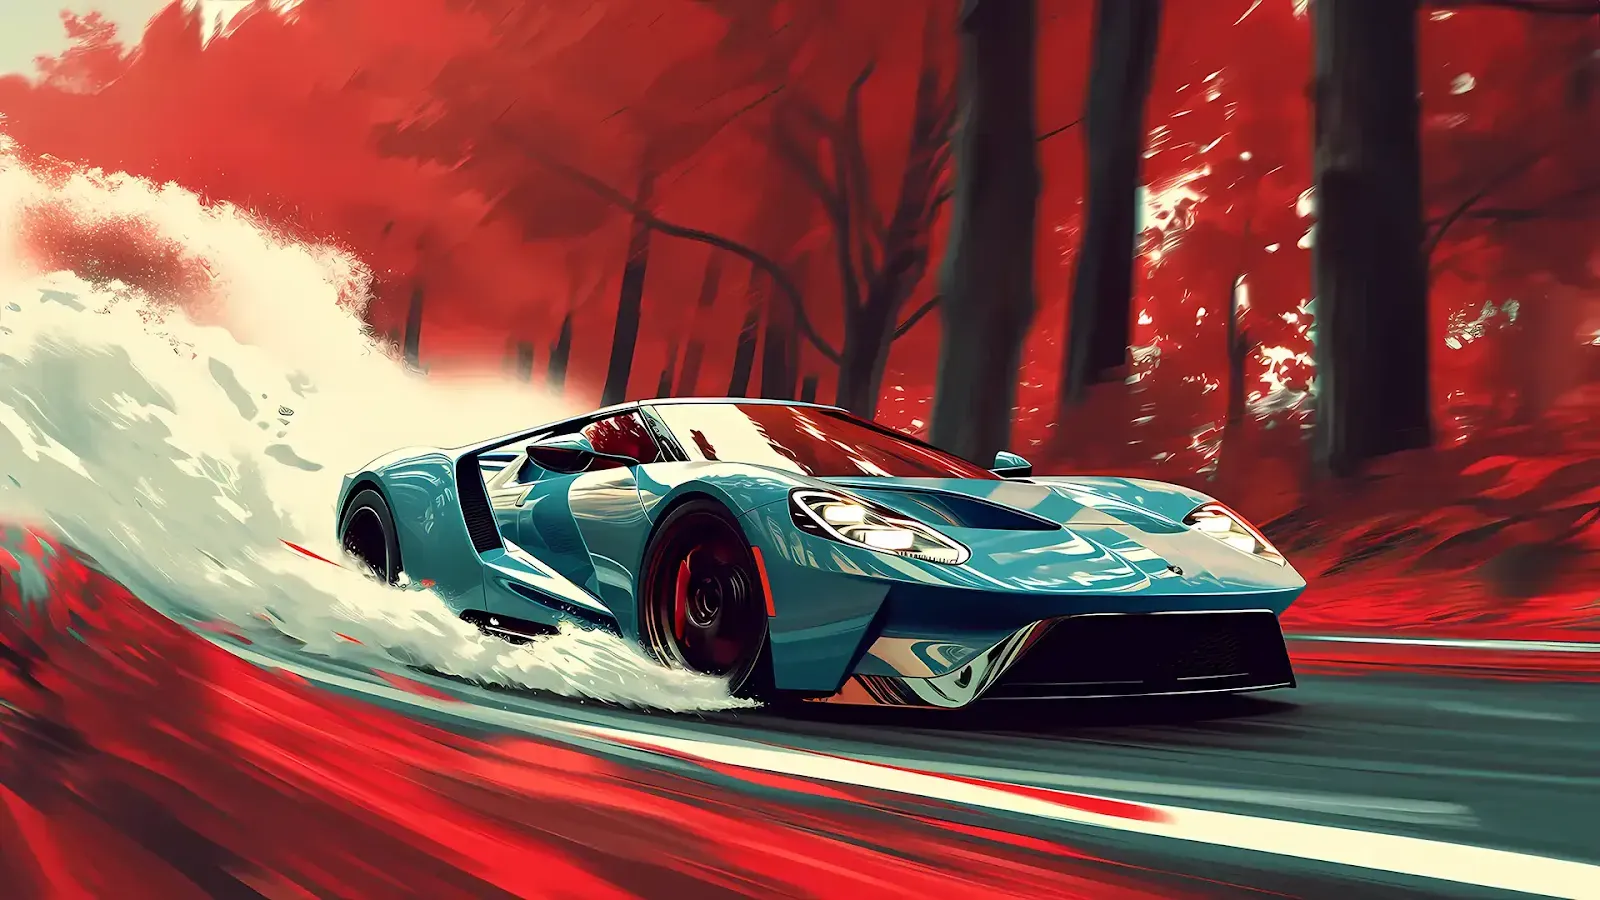 Dynamic illustration of a high-speed blue sports car racing through a vivid red forest, creating a contrast between technology and nature.